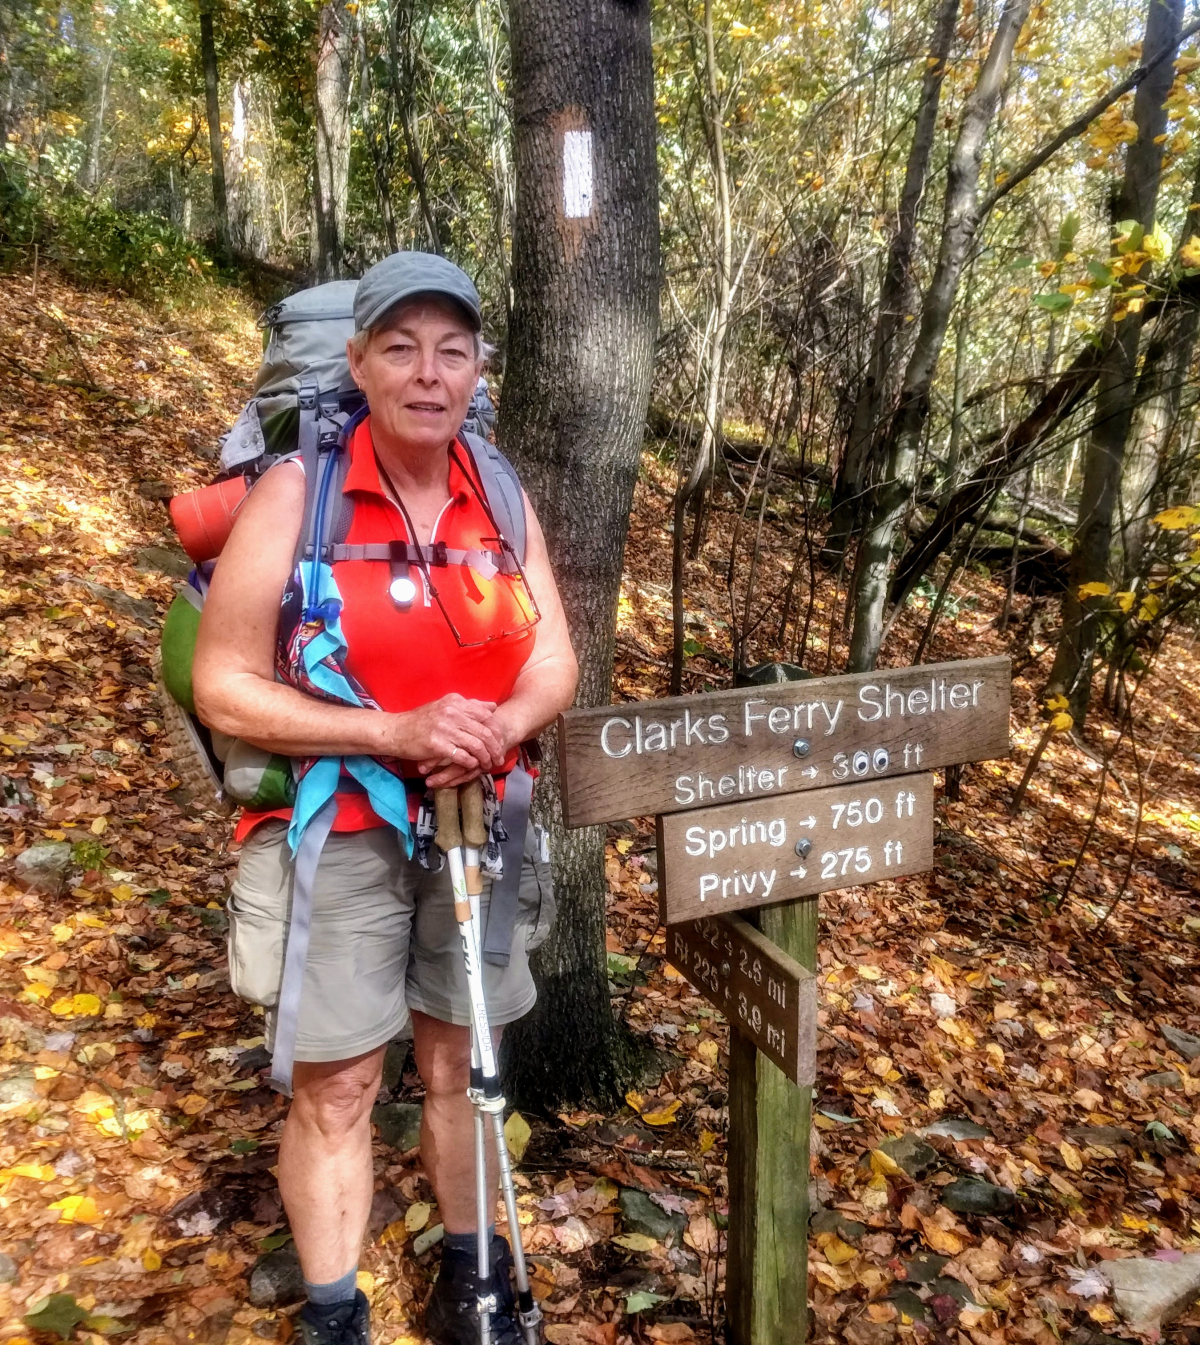 Tales from the Trails with Kathy Odvody